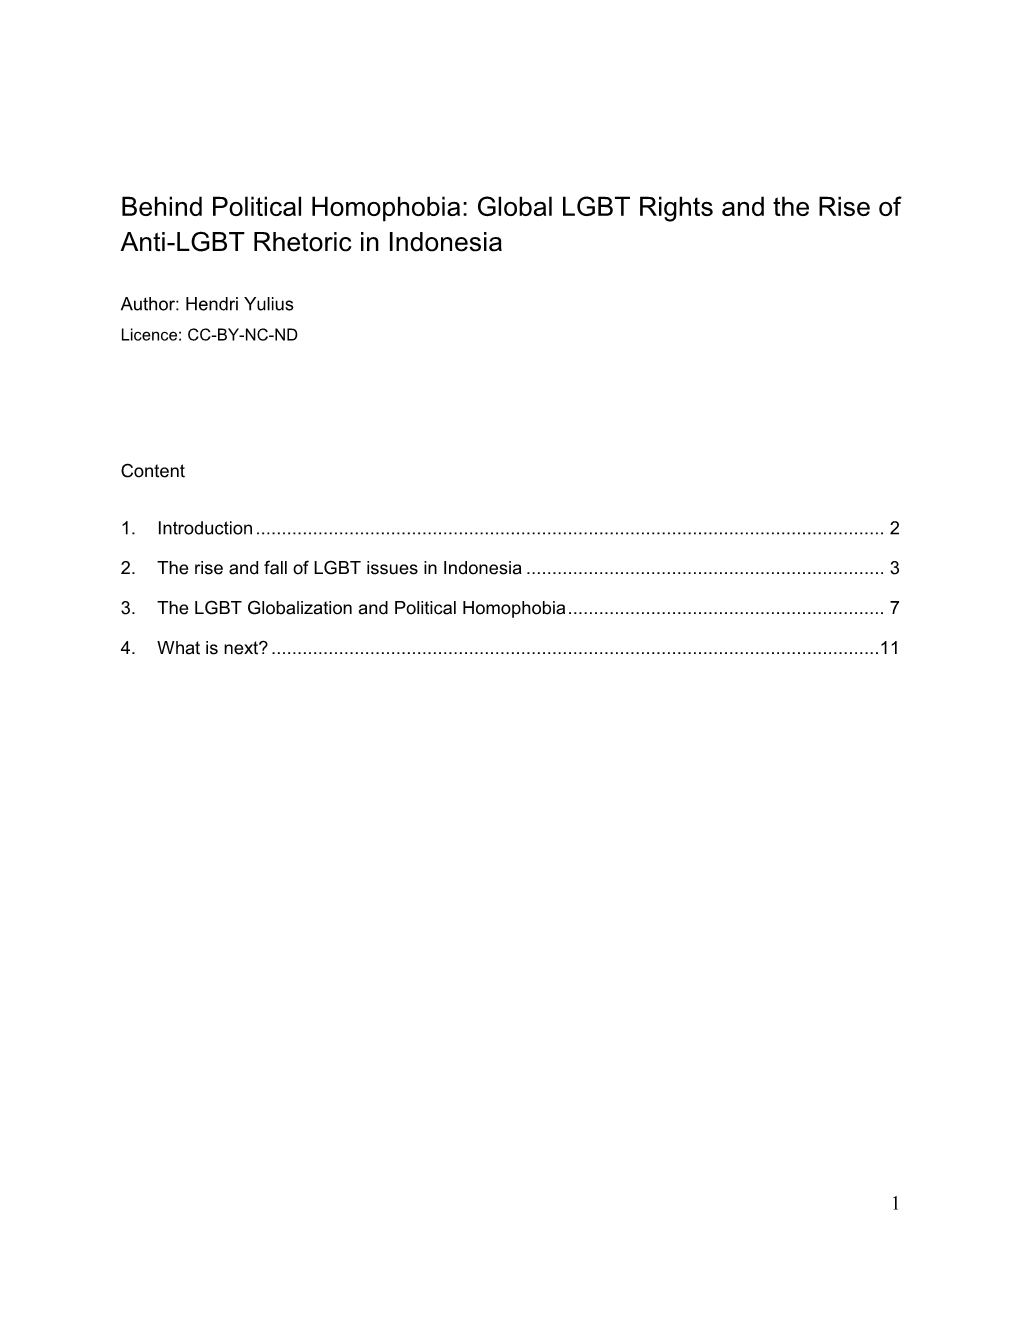 Behind Political Homophobia: Global LGBT Rights and the Rise of Anti-LGBT Rhetoric in Indonesia